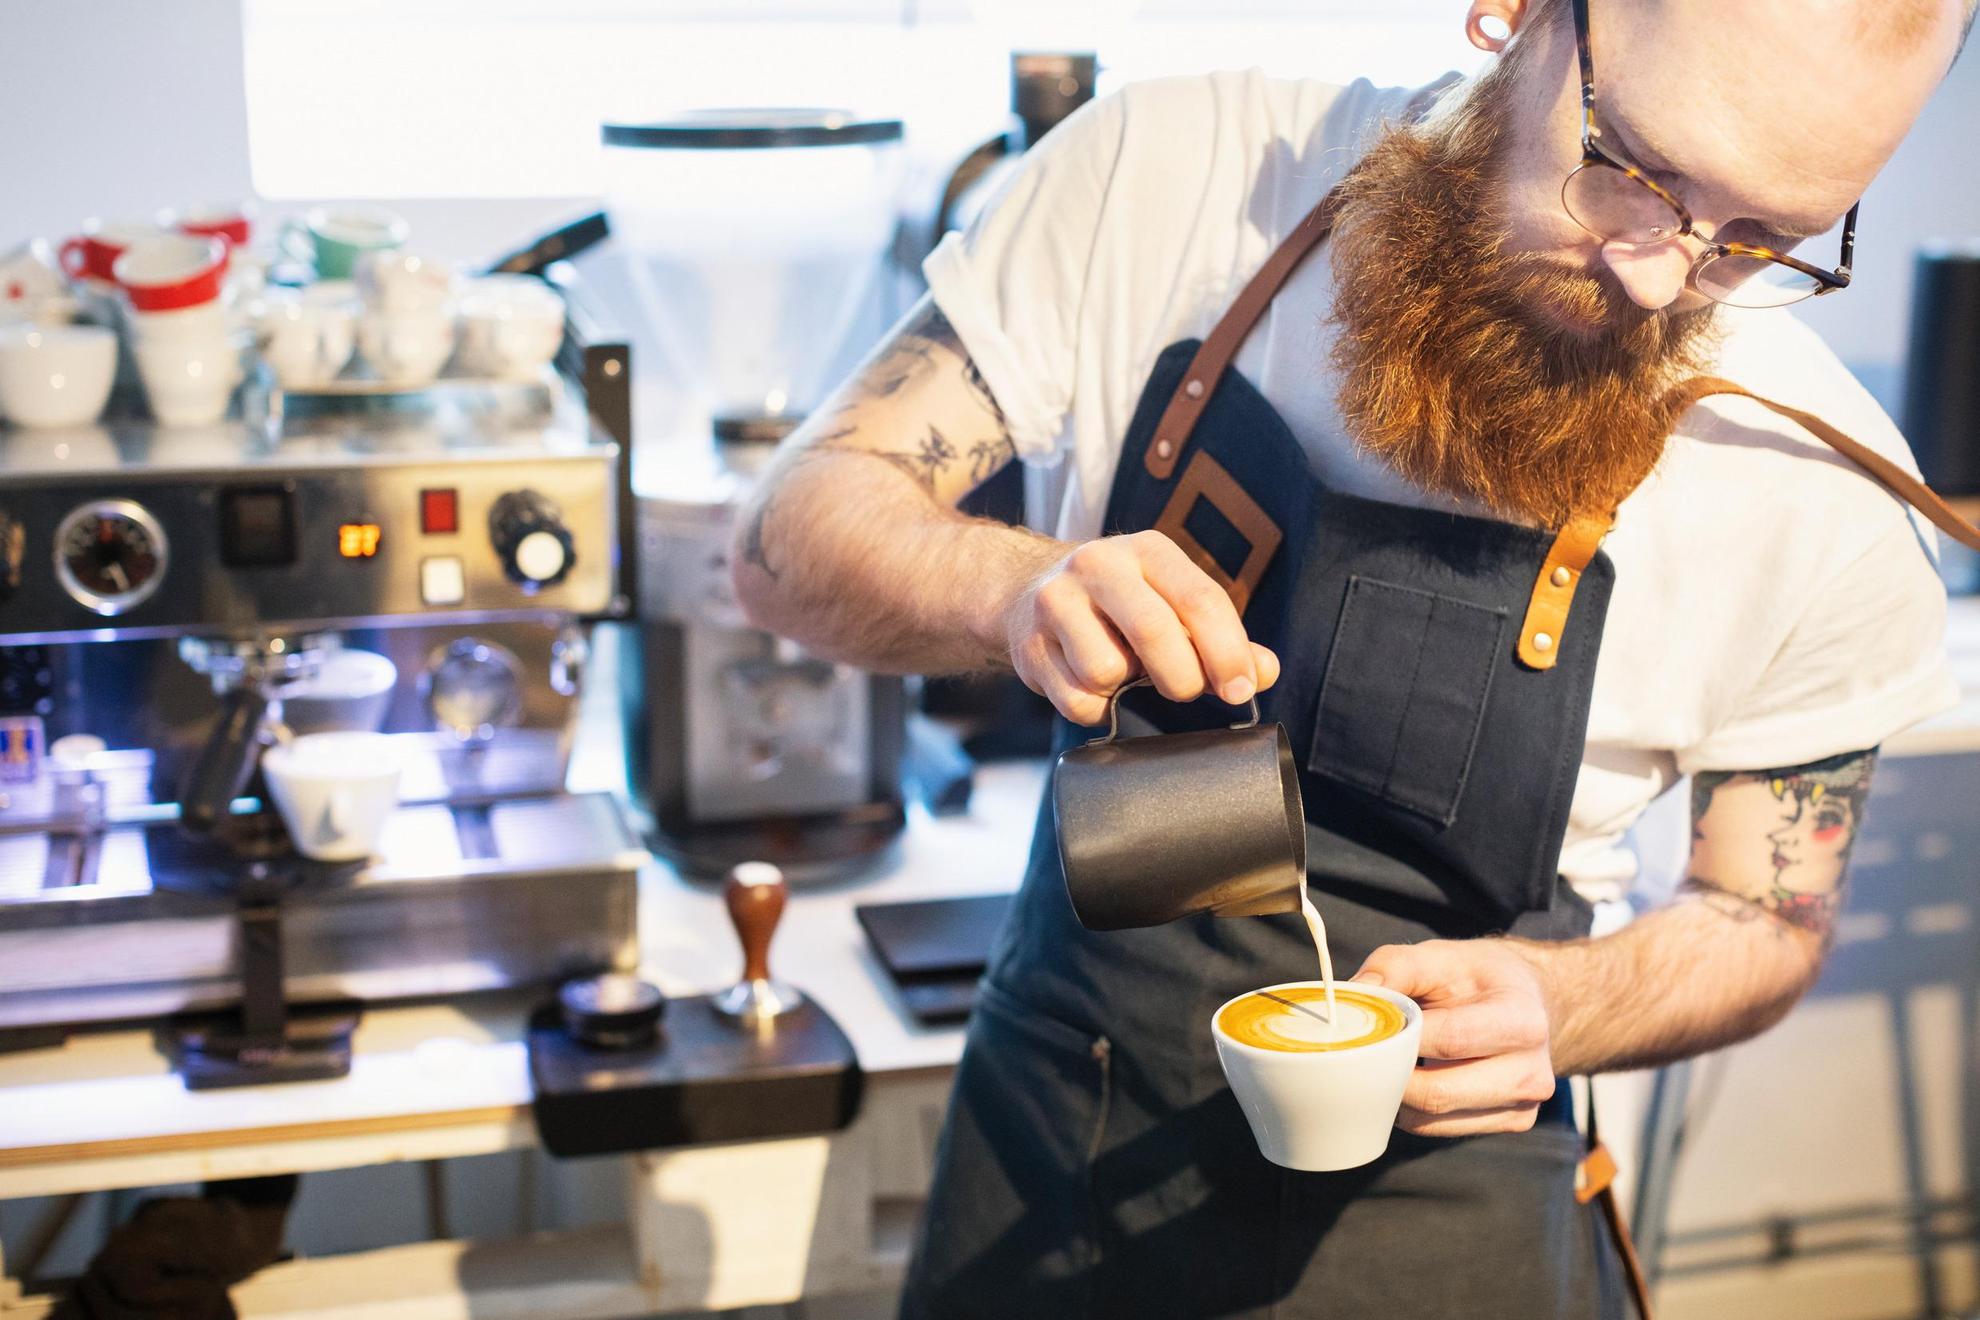 A man wearing a white t-shirt, glasses and a thick beard and an apron is pouring steamed milk into an espresso cup.